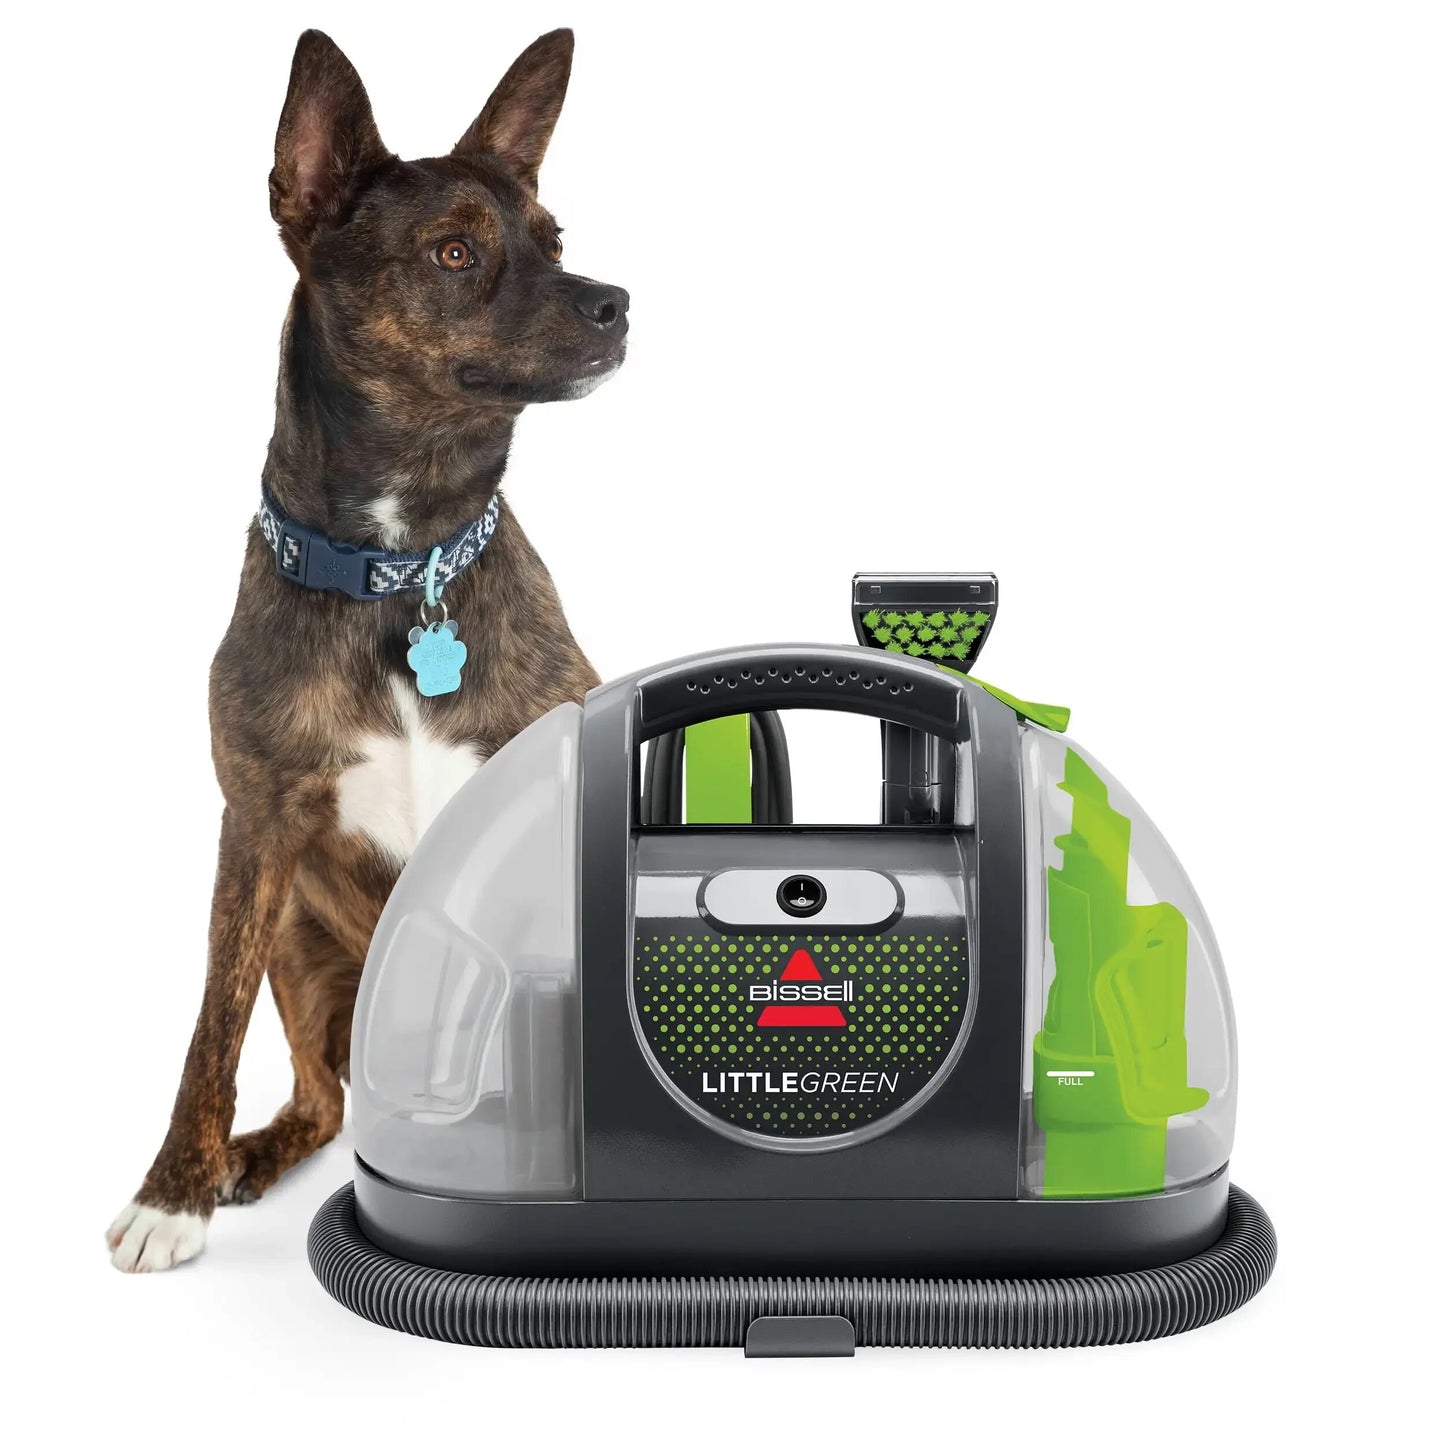 Vacuum Cleaners for Home Pets Little Green Portable Carpet Cleaner